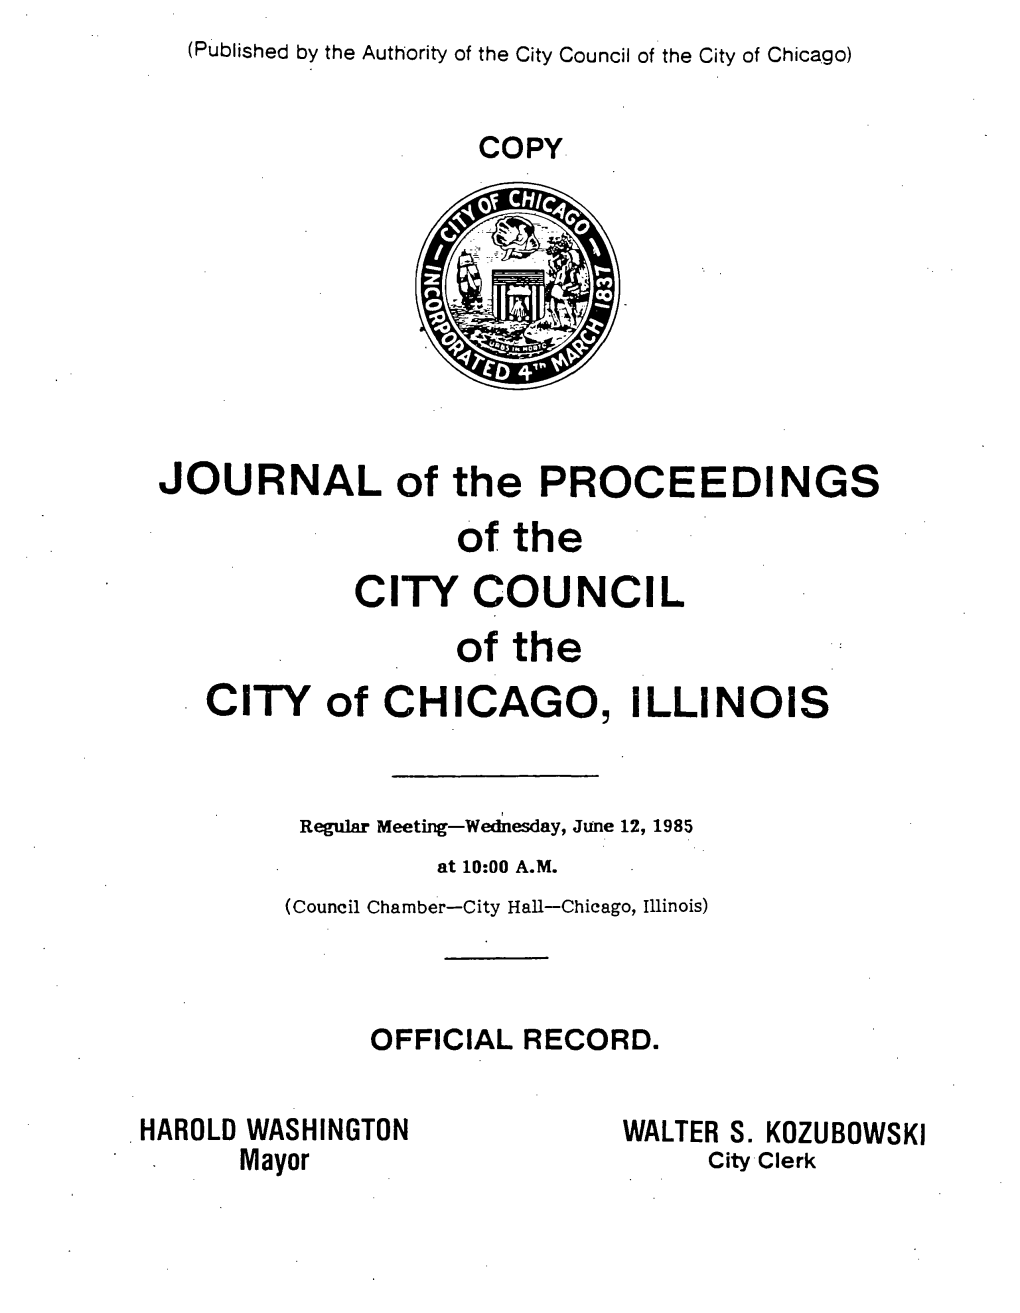 JOURNAL of the PROCEEDINGS of the CITY COUNCIL Ofthe CITY of CHICAGO, ILLINOIS